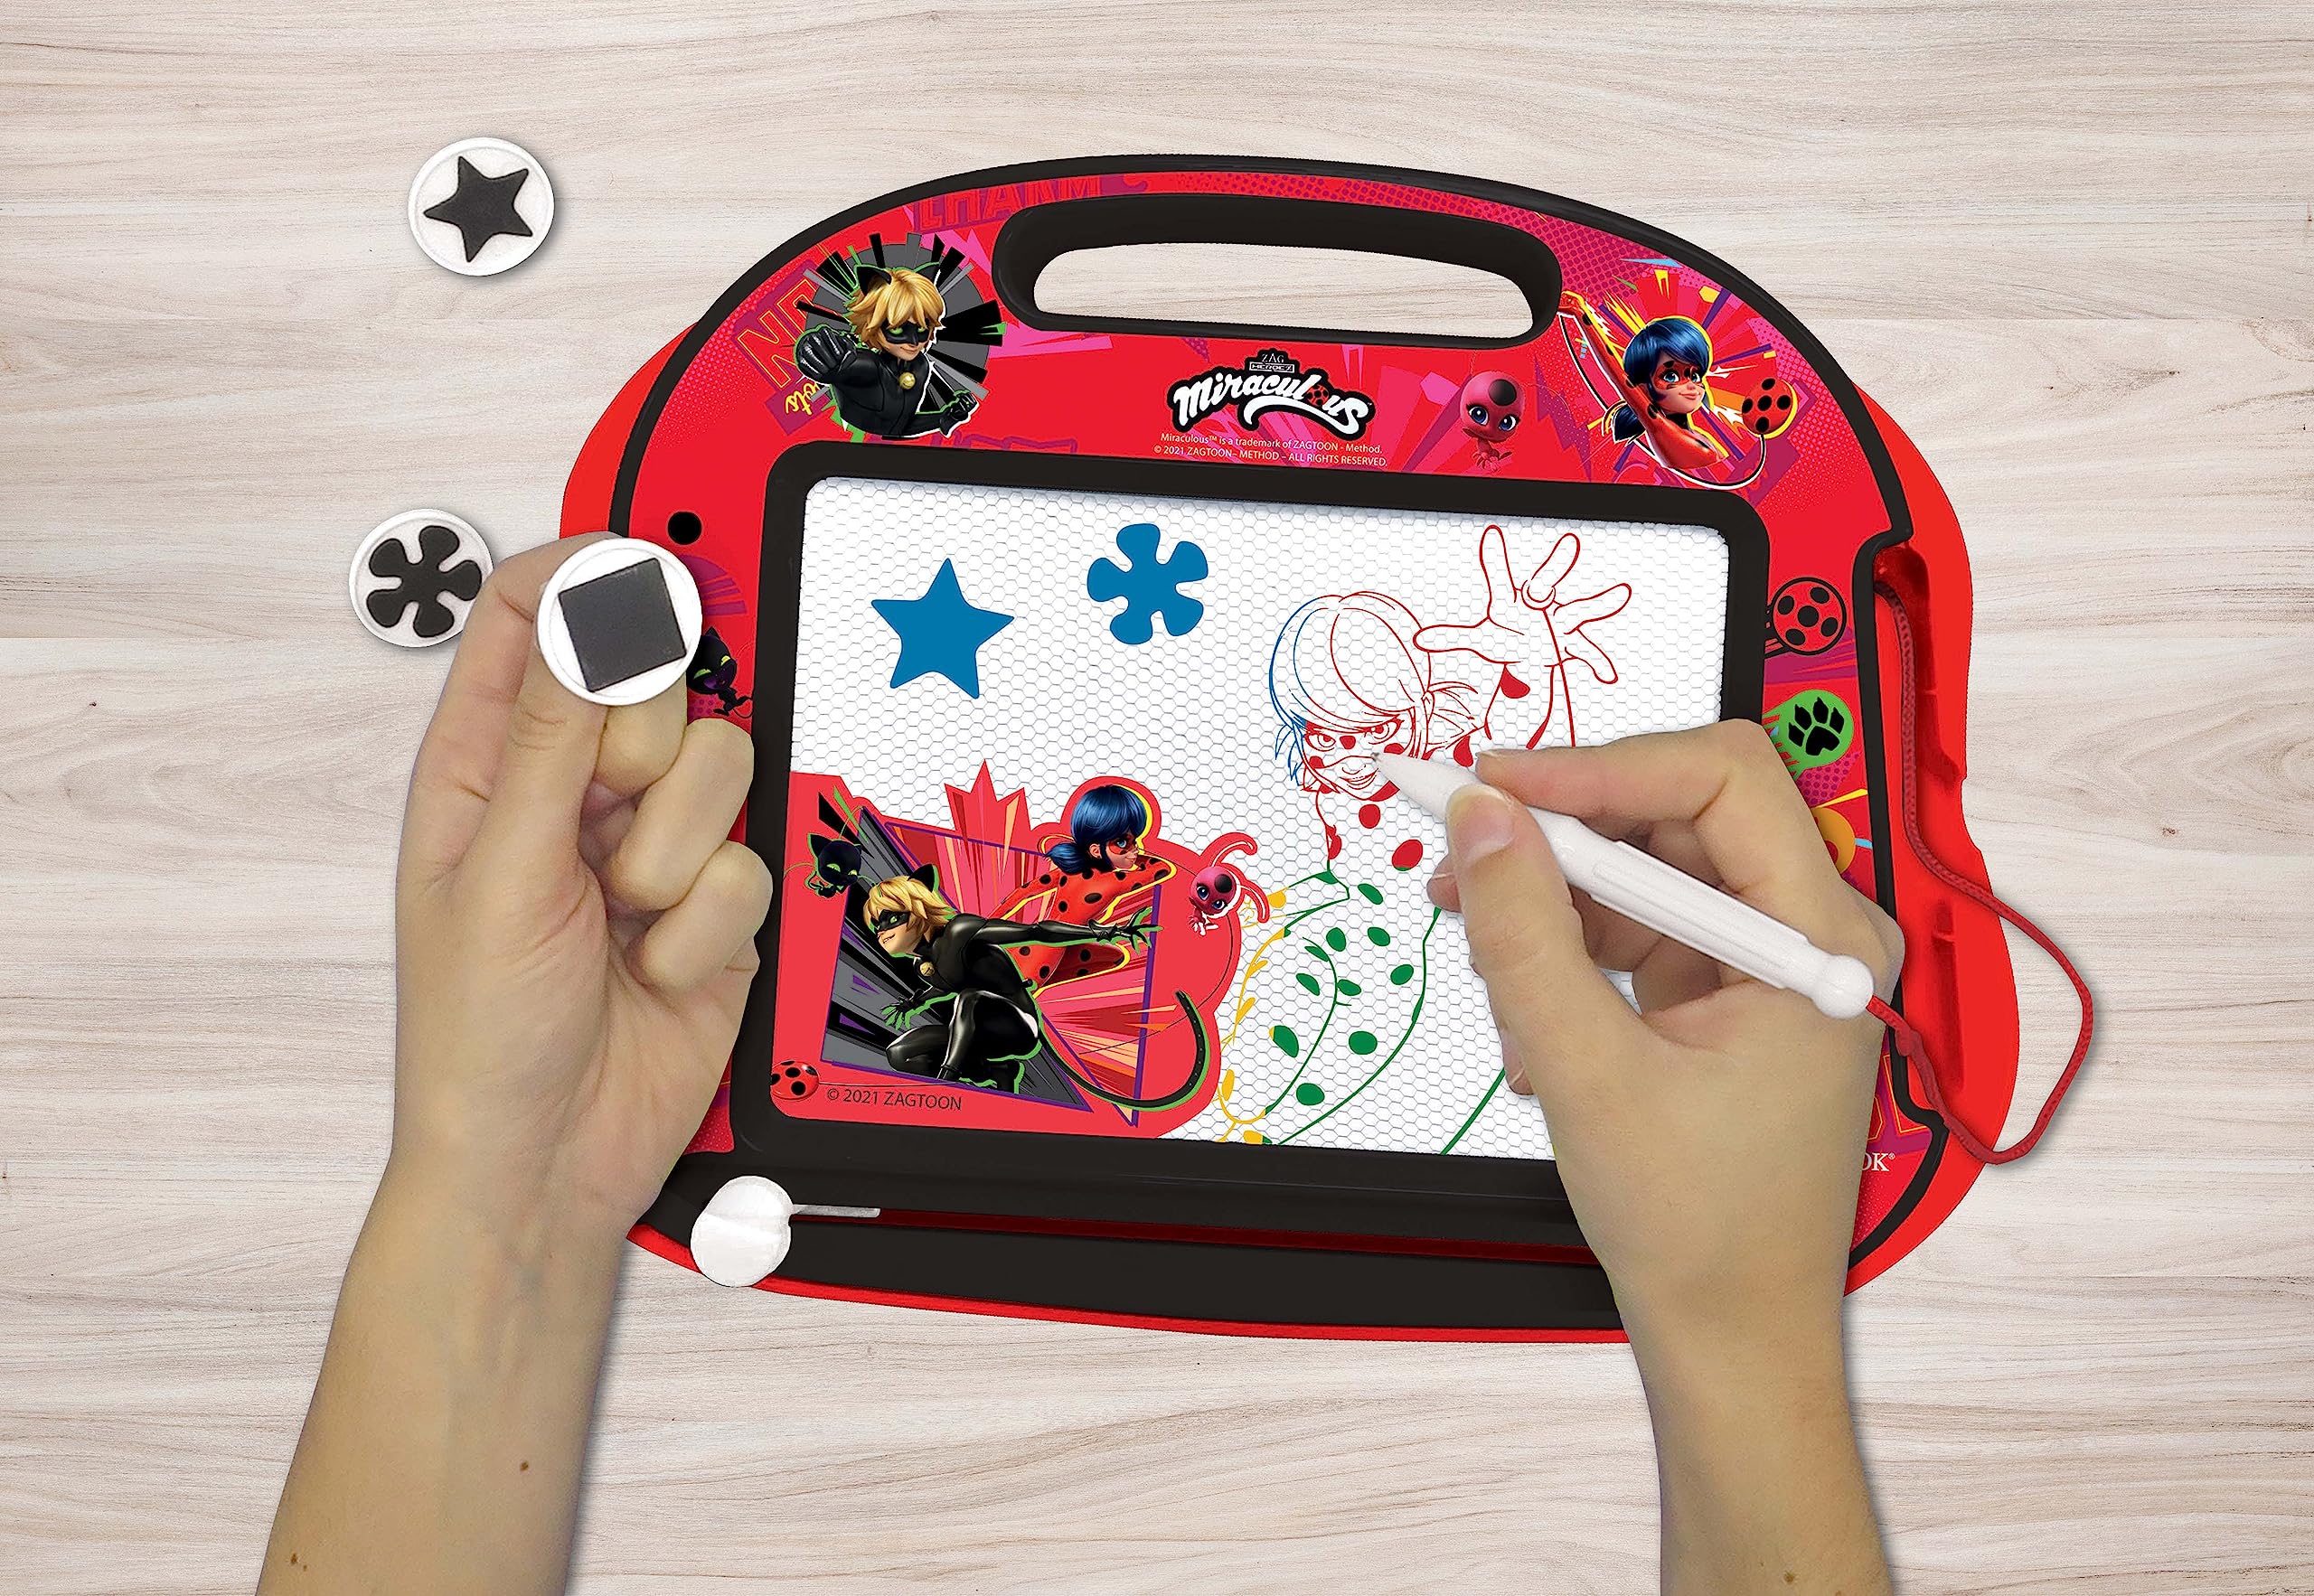 LEXiBOOK, Miraculous Ladybug Cat Noir, Multicolor Magic Magnetic Drawing Board, Artistic Creative Toy for Girls and Boys, Stylus Pen and Stamps, Red/Black, CRMI550